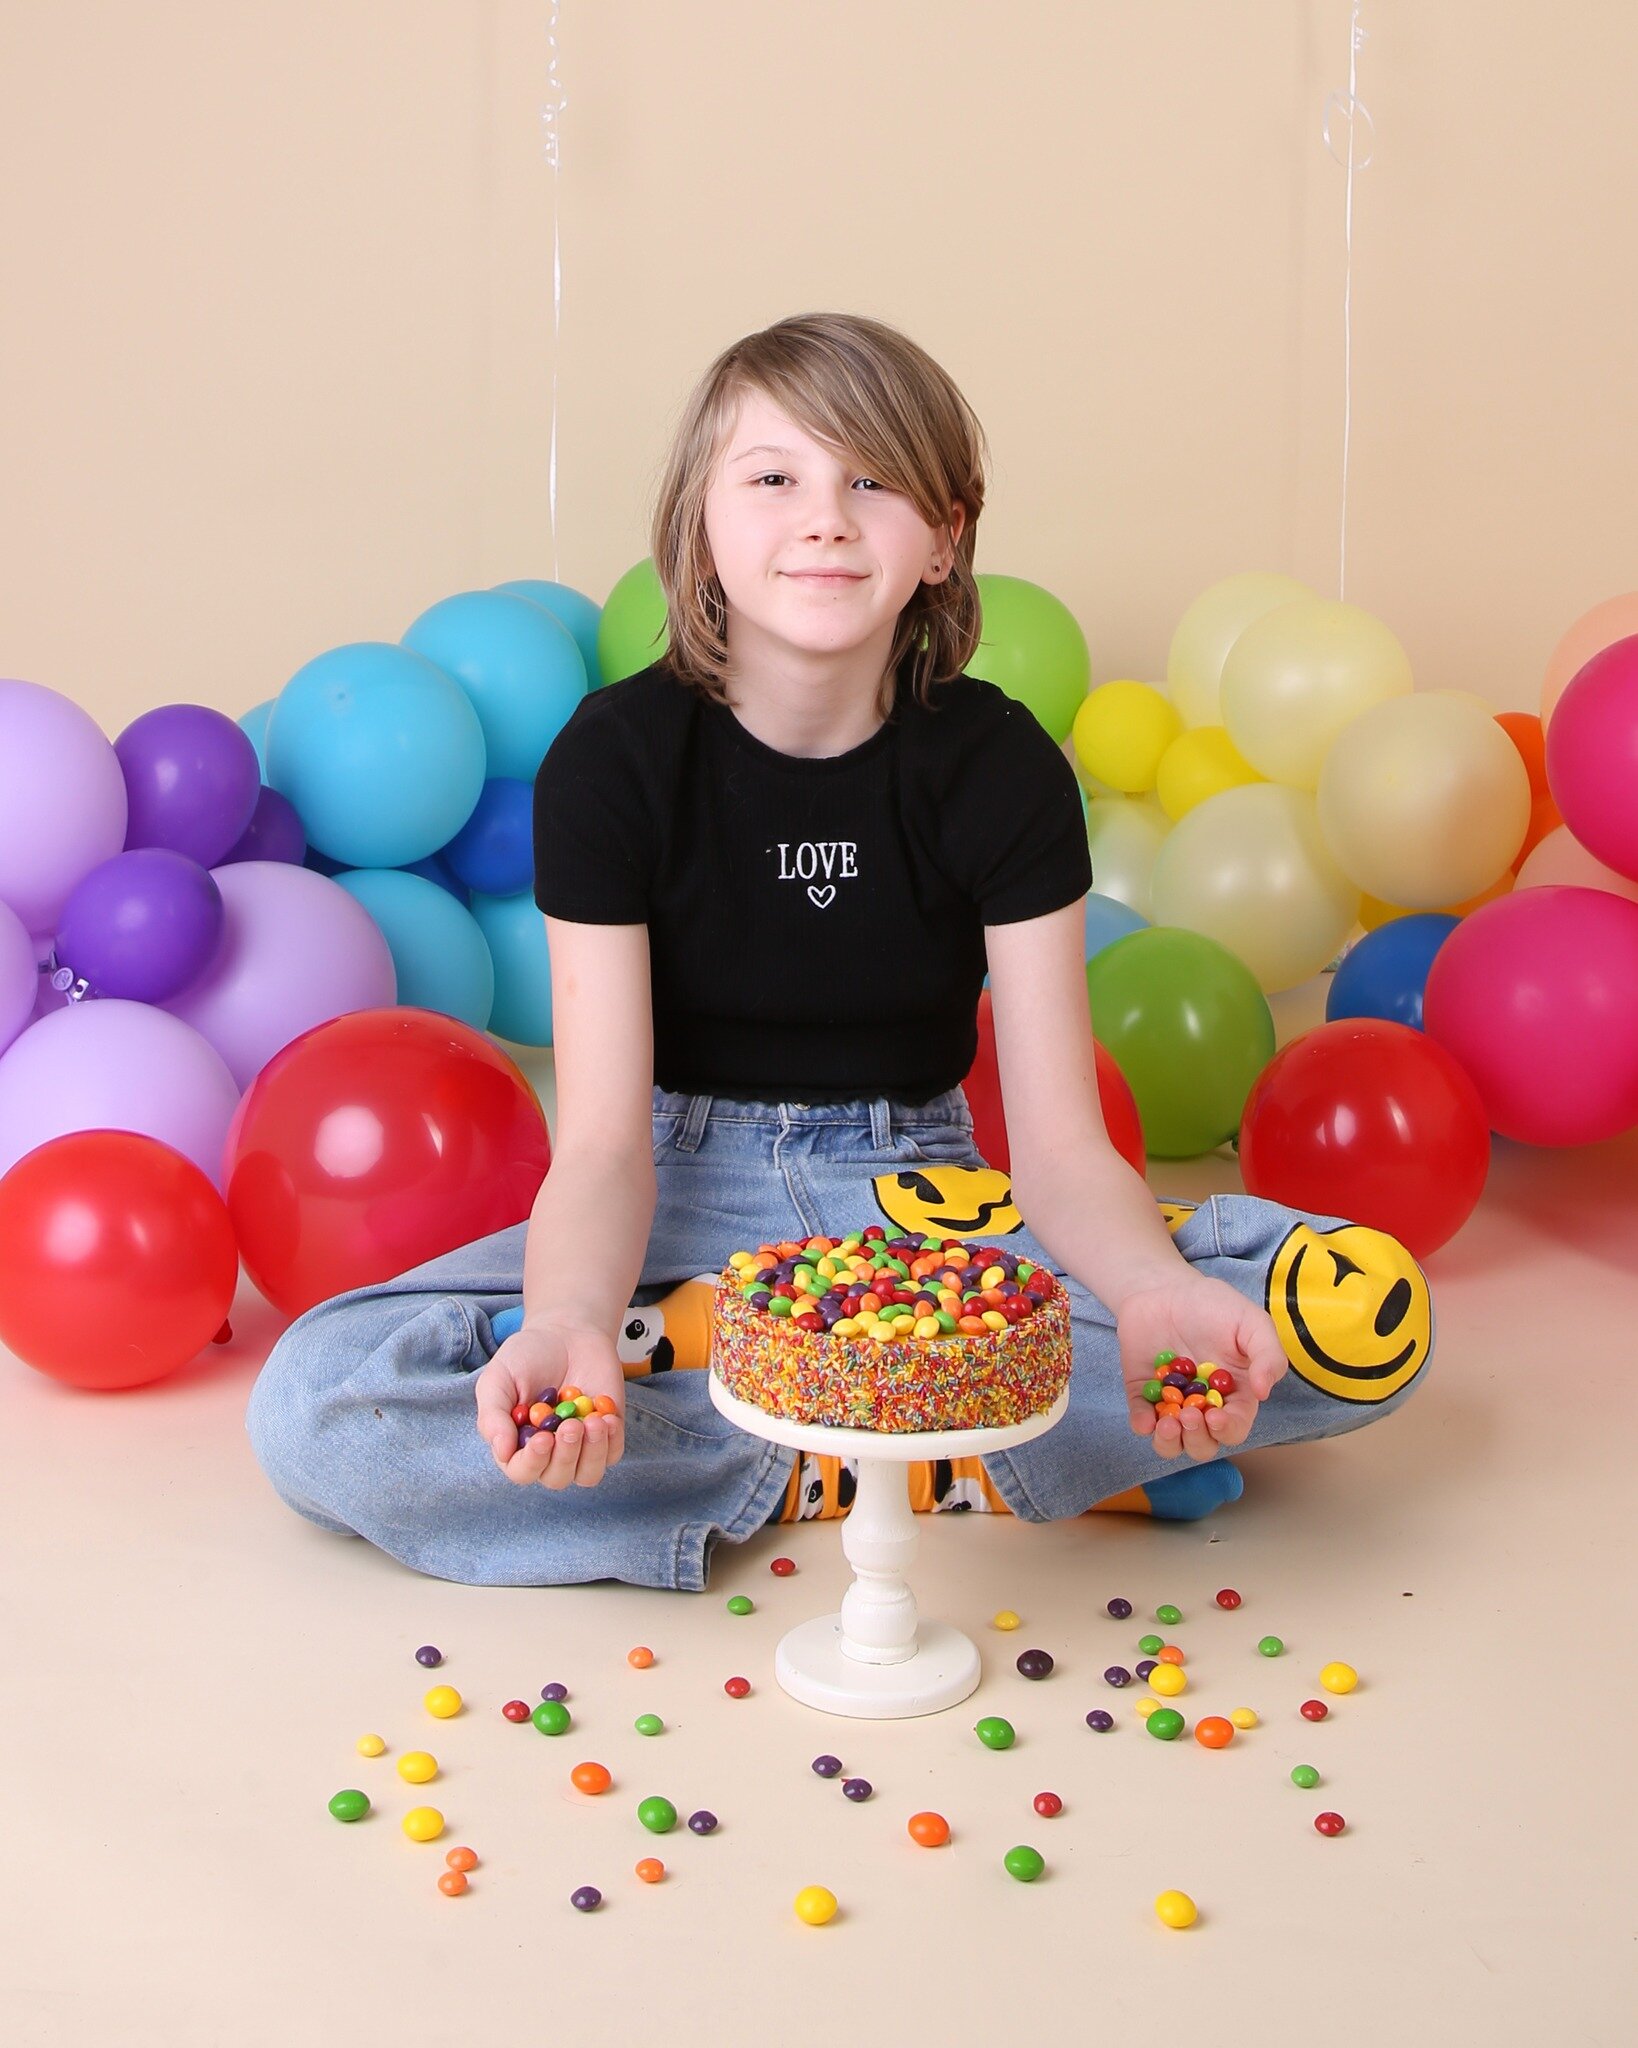 We celebrated Roxy's birthday ten years after her first Cake Smash here at Wink! 🌈

Photographed by Holly
 
https://www.winkphoto.co.uk/book-now
#indigbeth #birminghamuk #custardfactory #birthdayphotoshoot #cakesmash